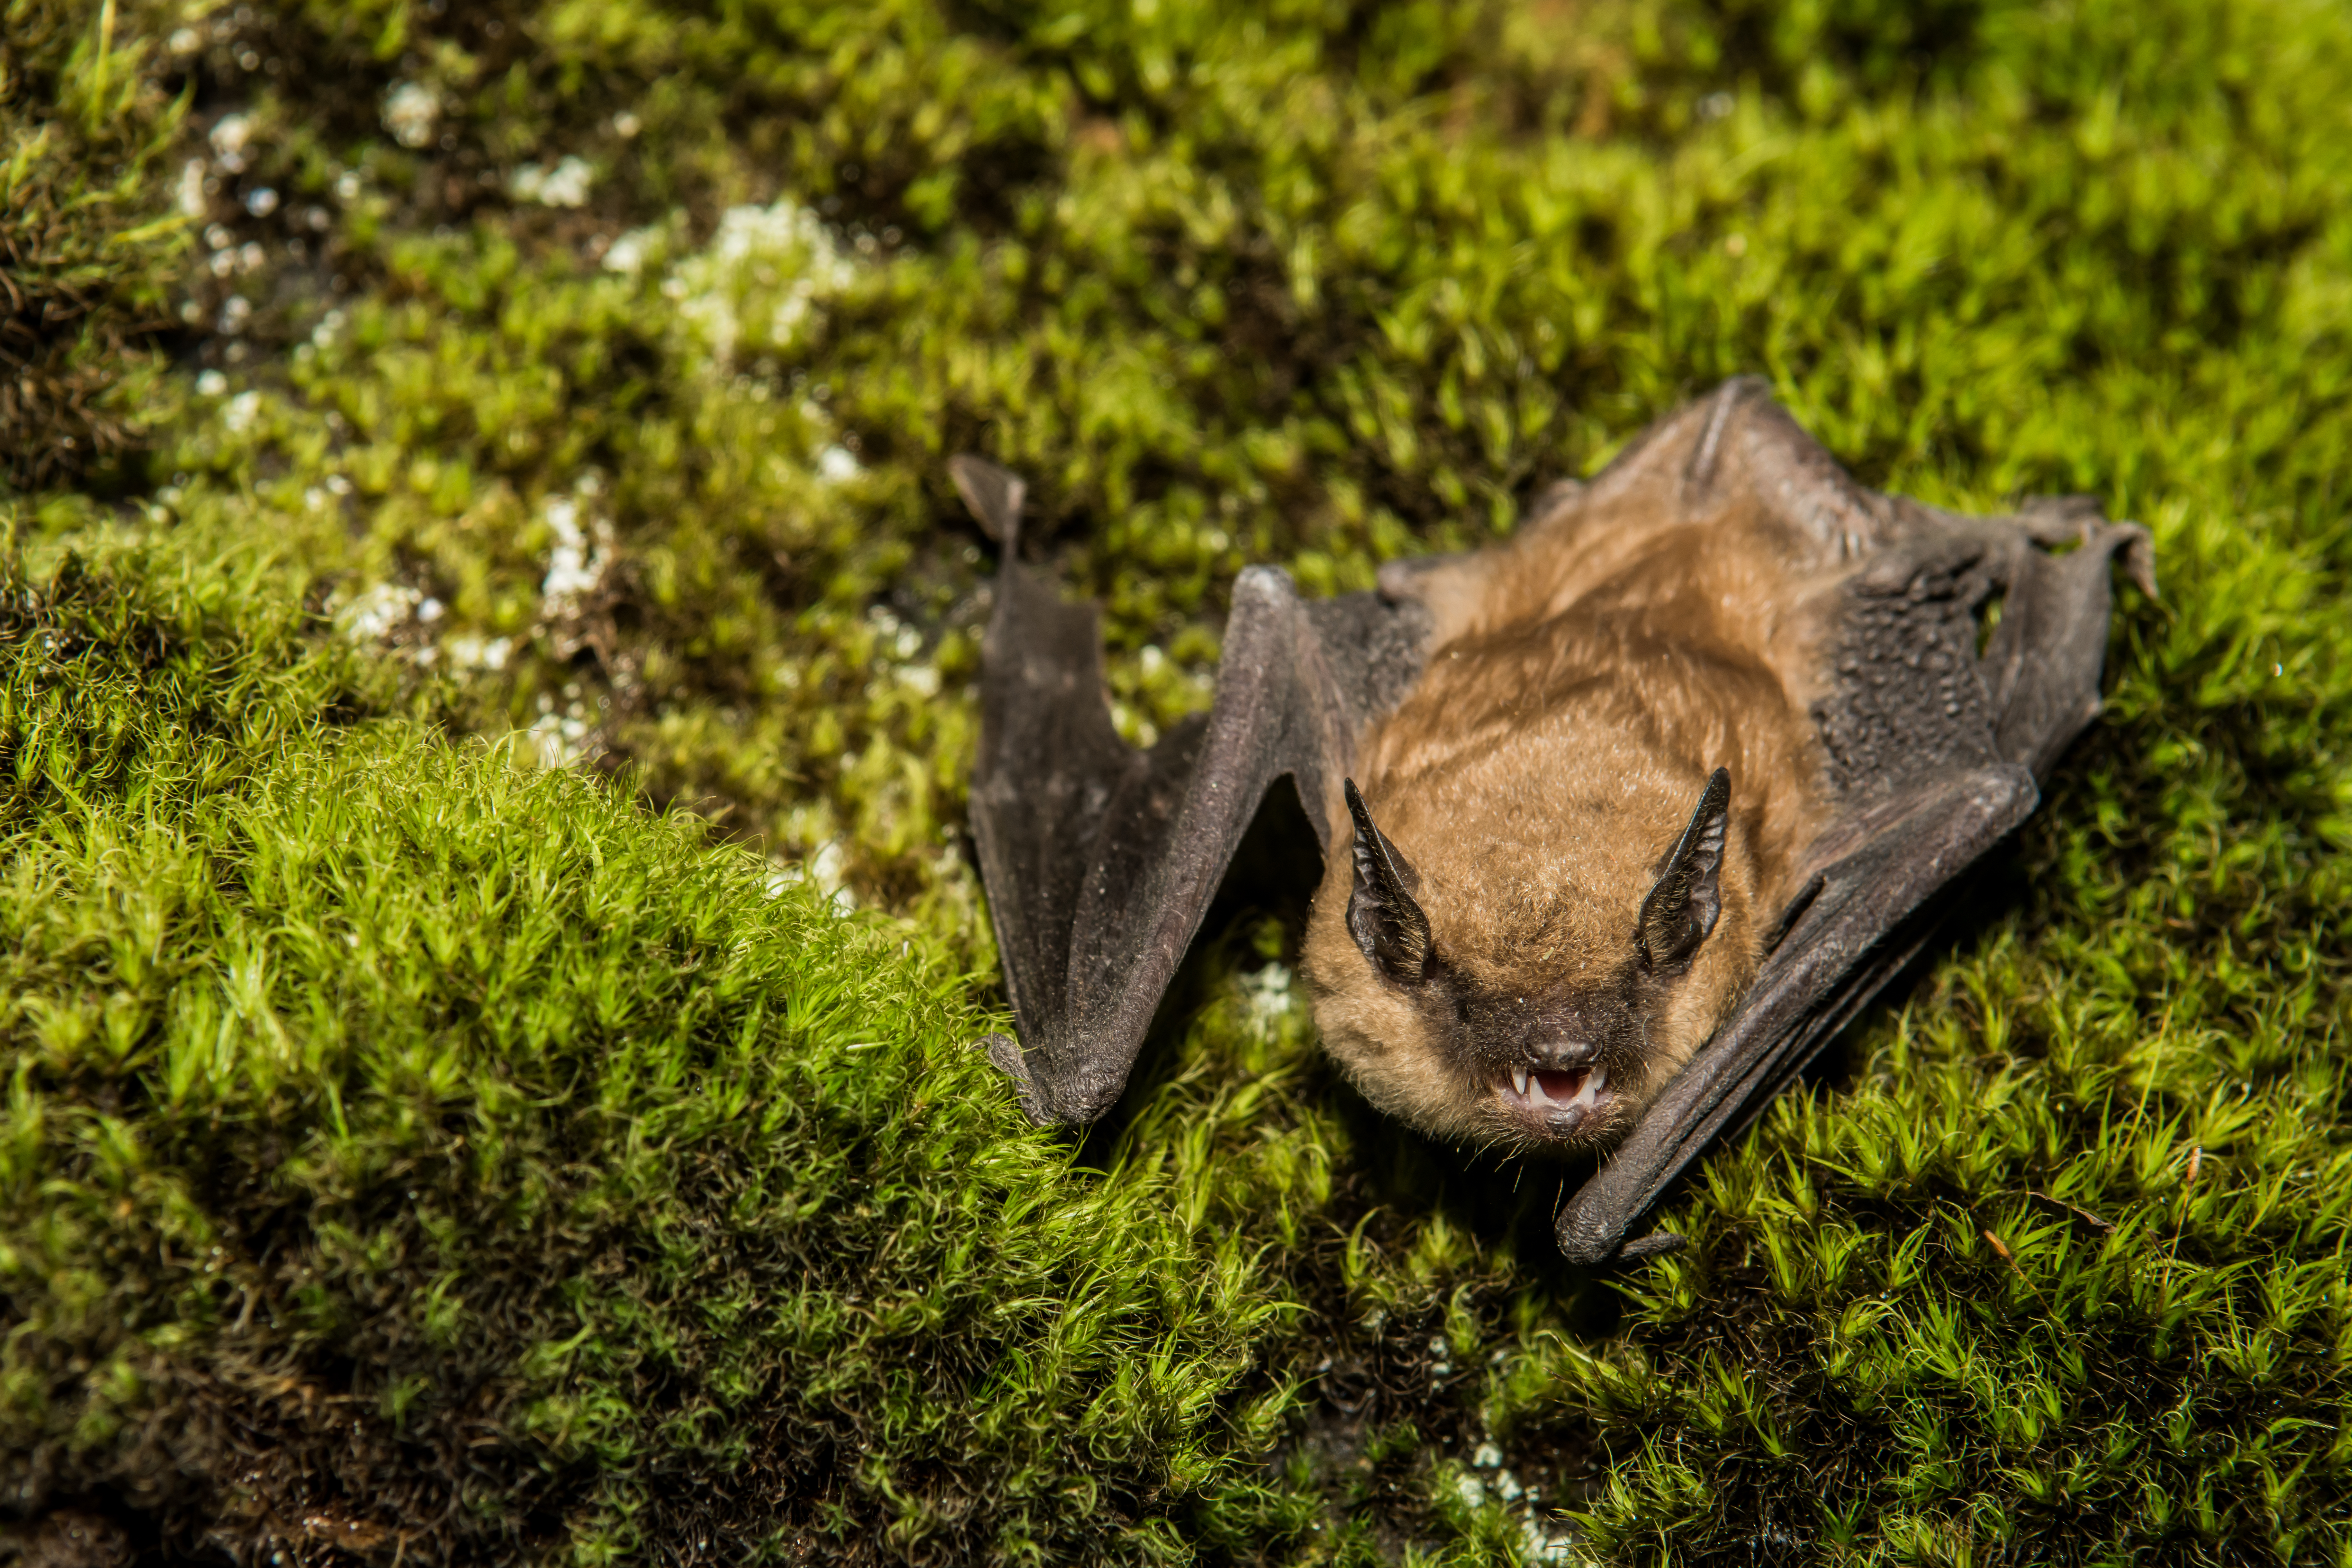 Bat on bed of green moss